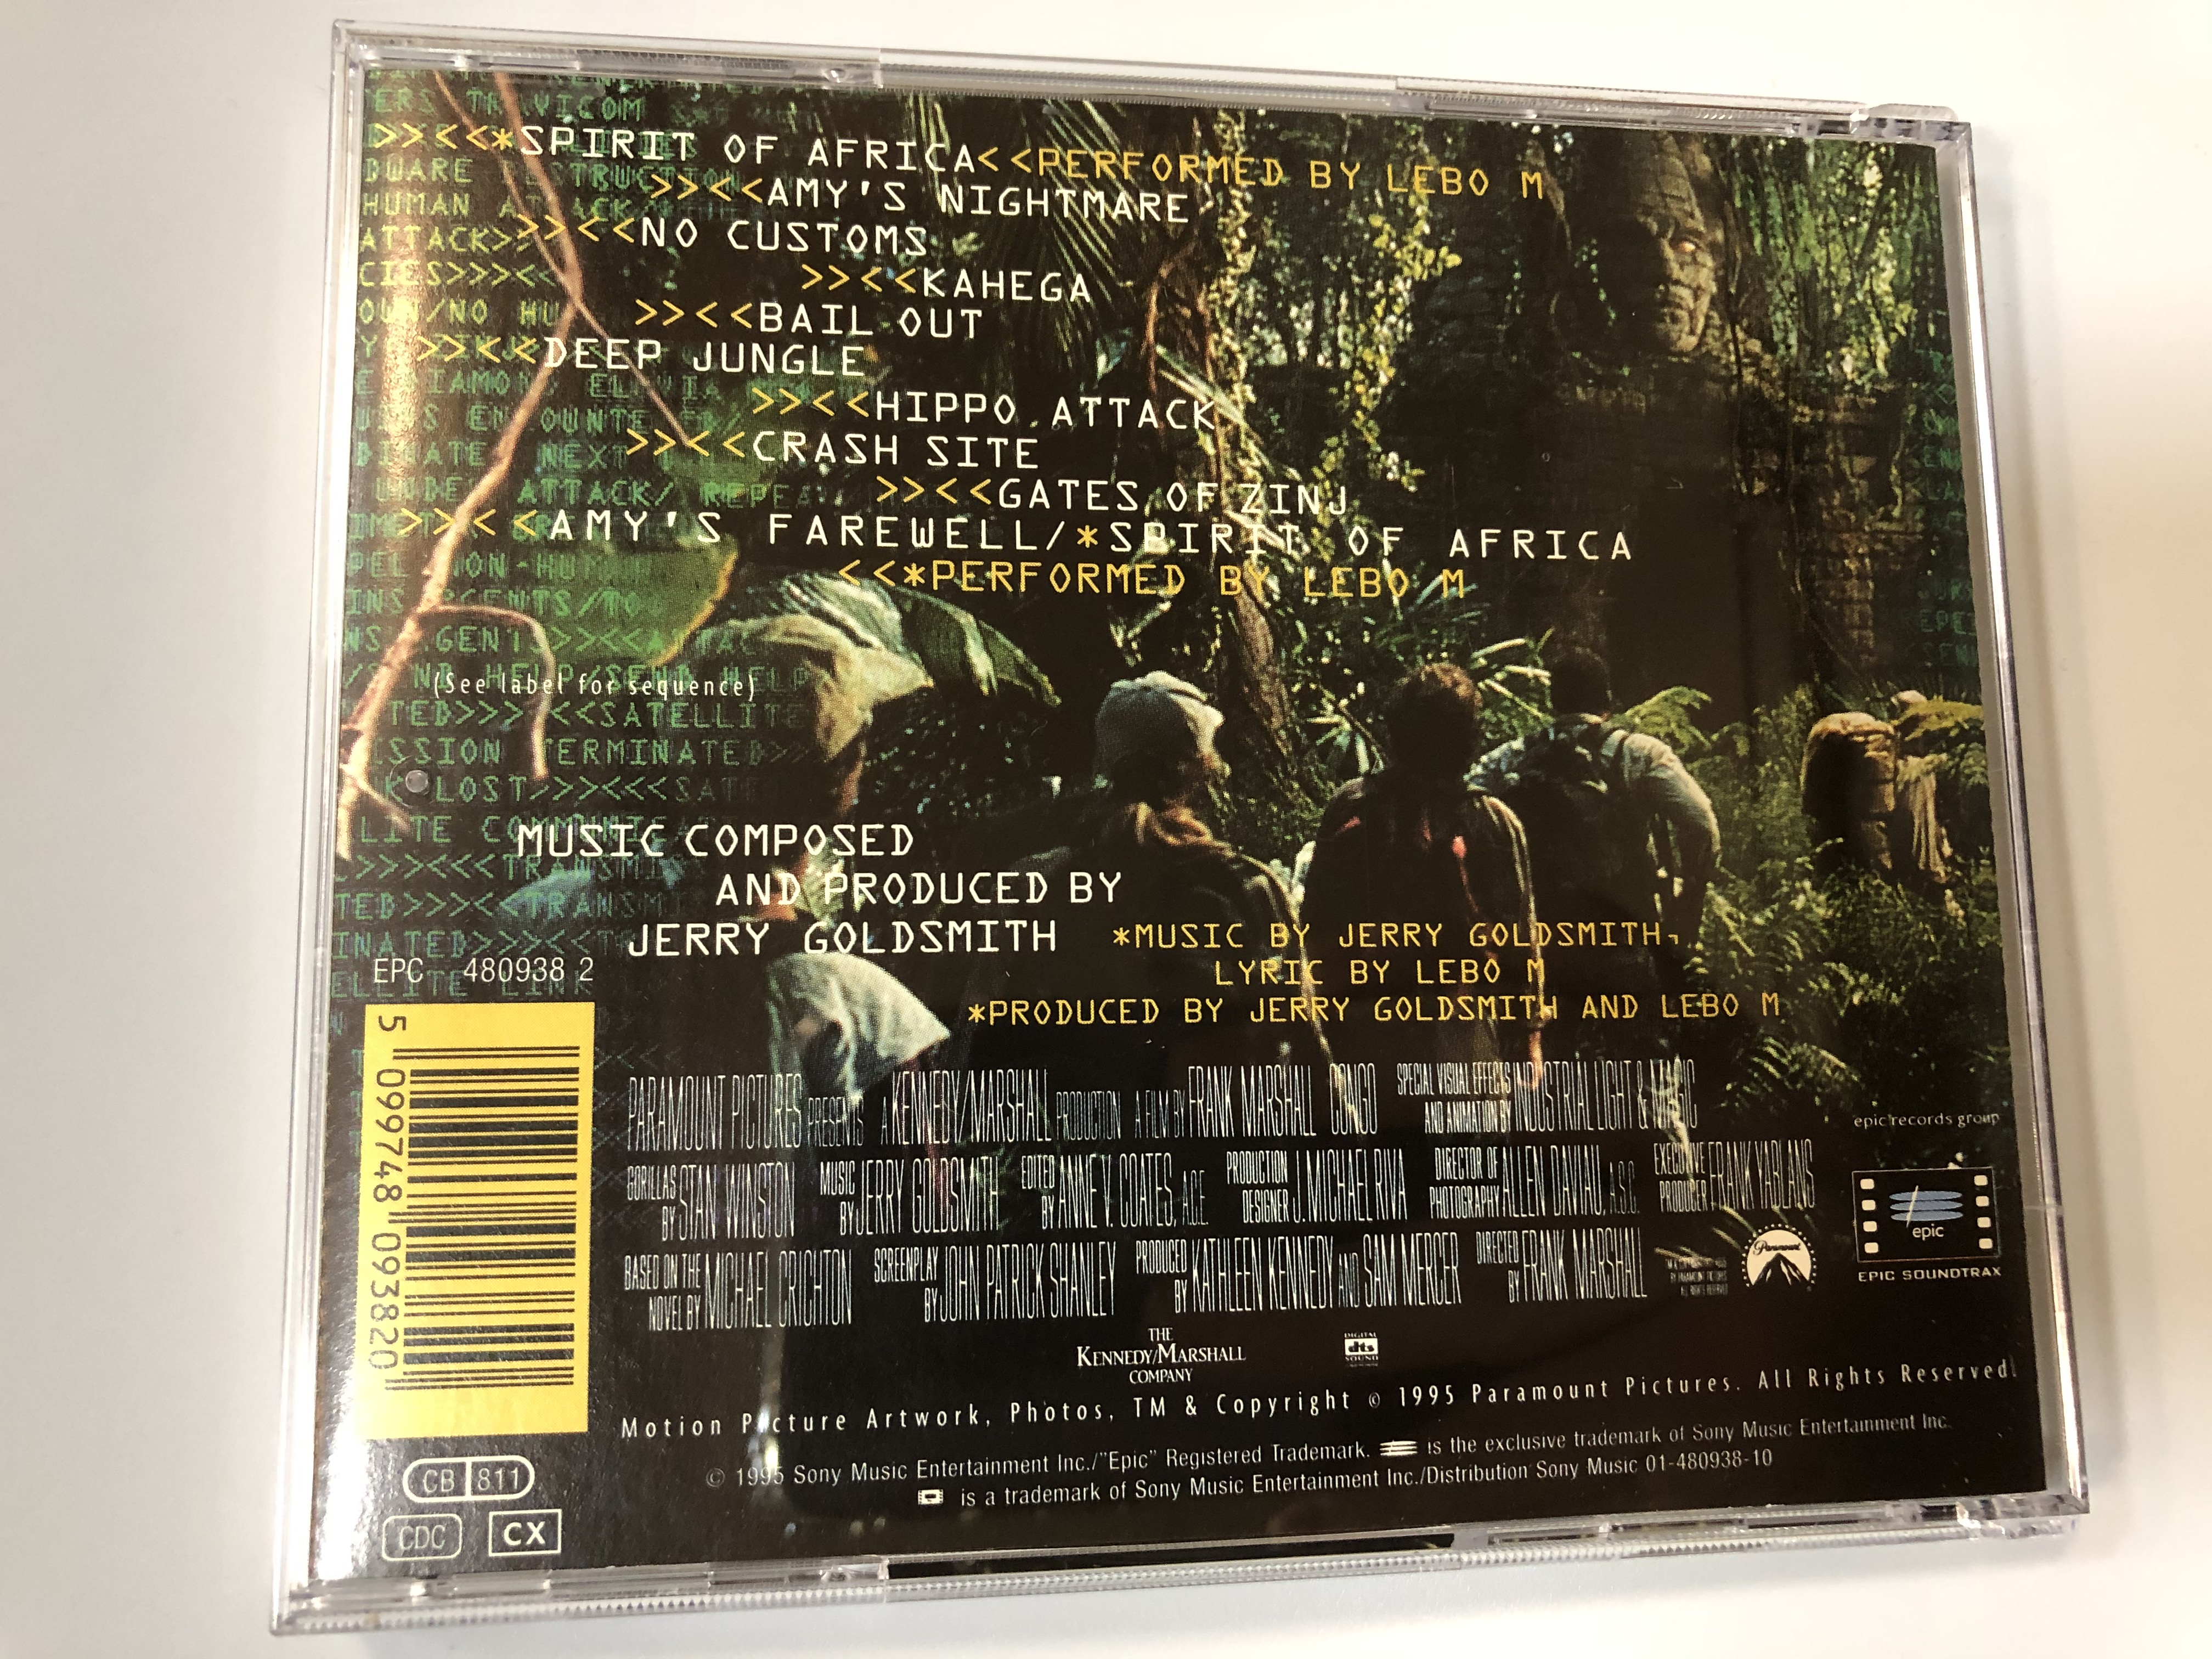 congo-original-motion-picture-soundtrack-music-composed-and-conducted-by-jerry-goldsmith-epic-soundtrax-audio-cd-1995-480938-2-4-.jpg